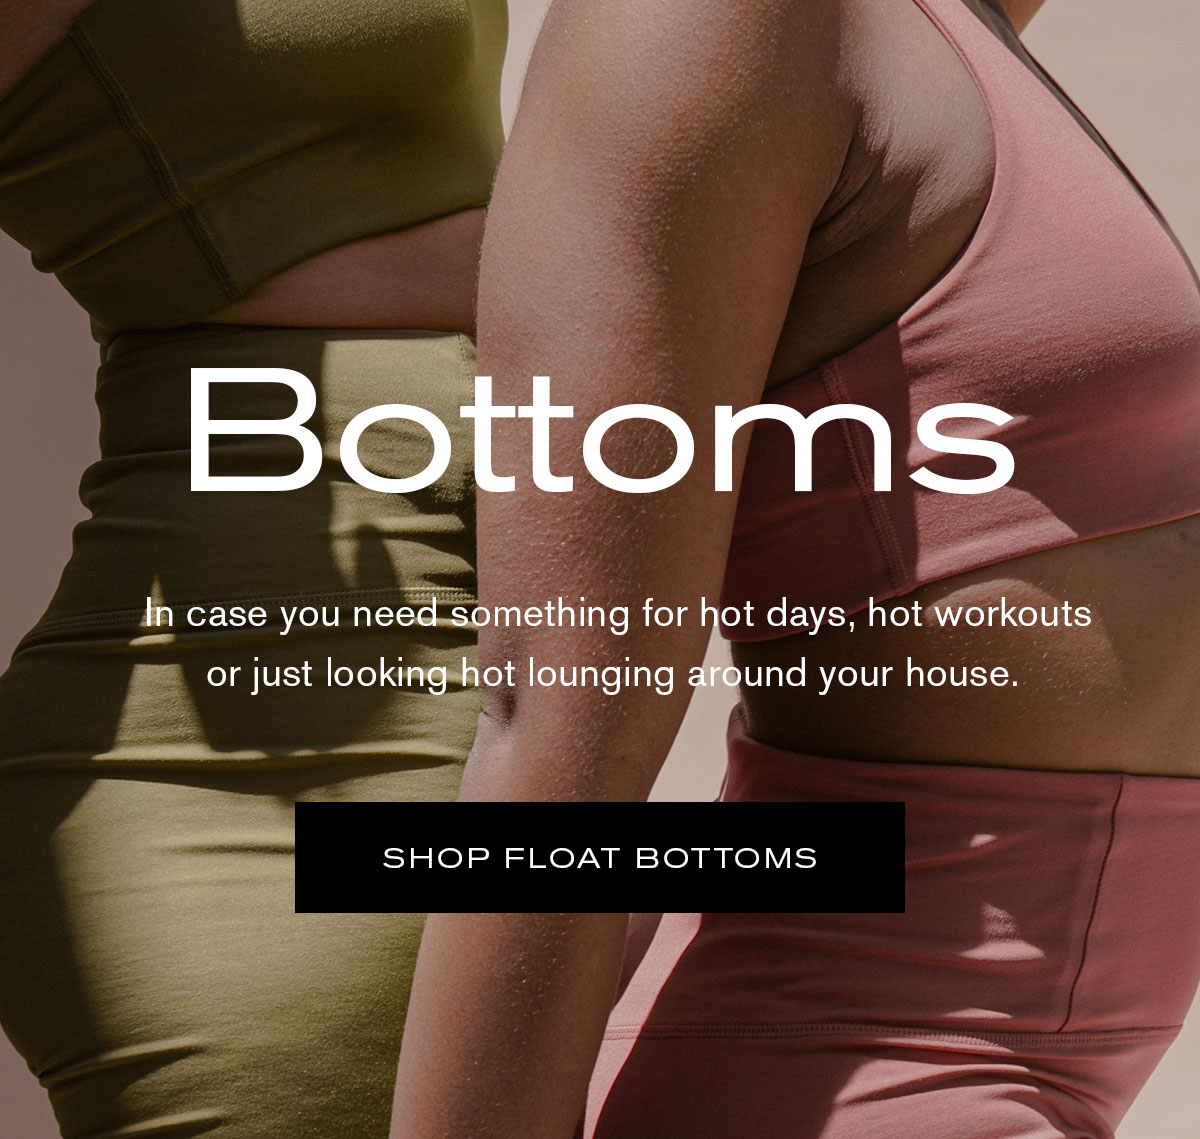 Bottoms - In case you need something for hot days, hot workouts or just looking hot lounging around your house.